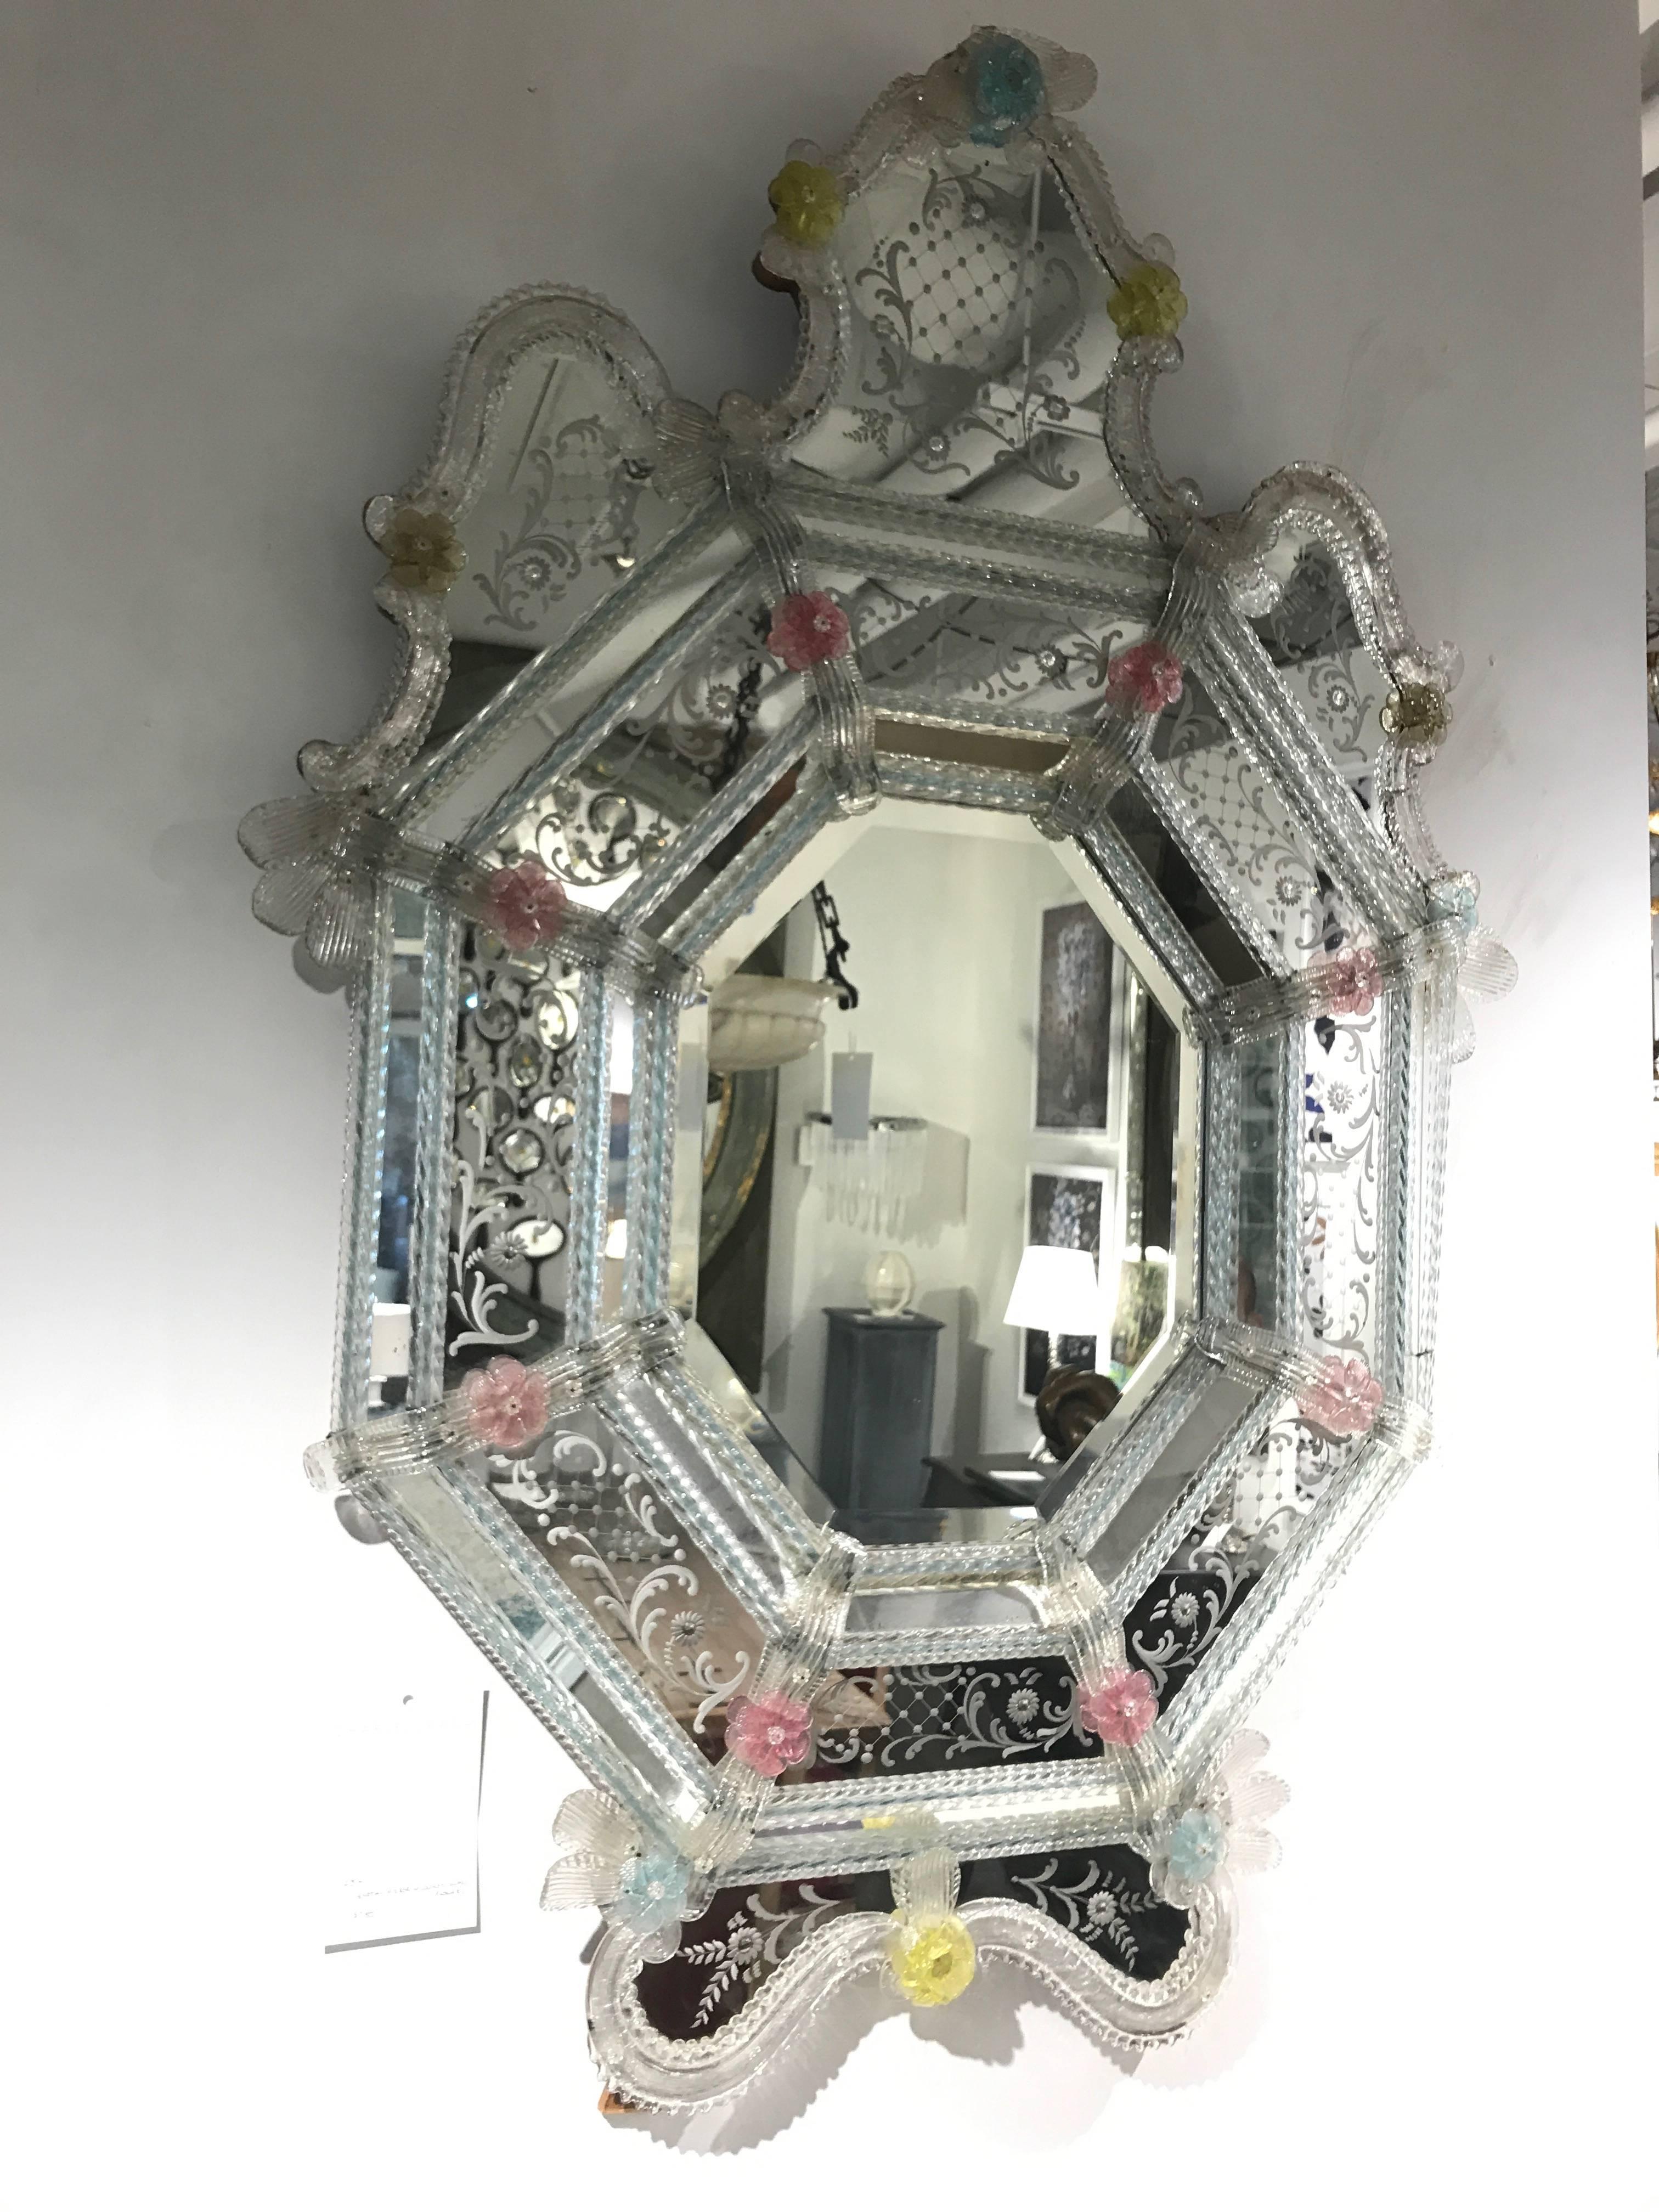 19th Century Venetian Mirror with colored glass flowers.